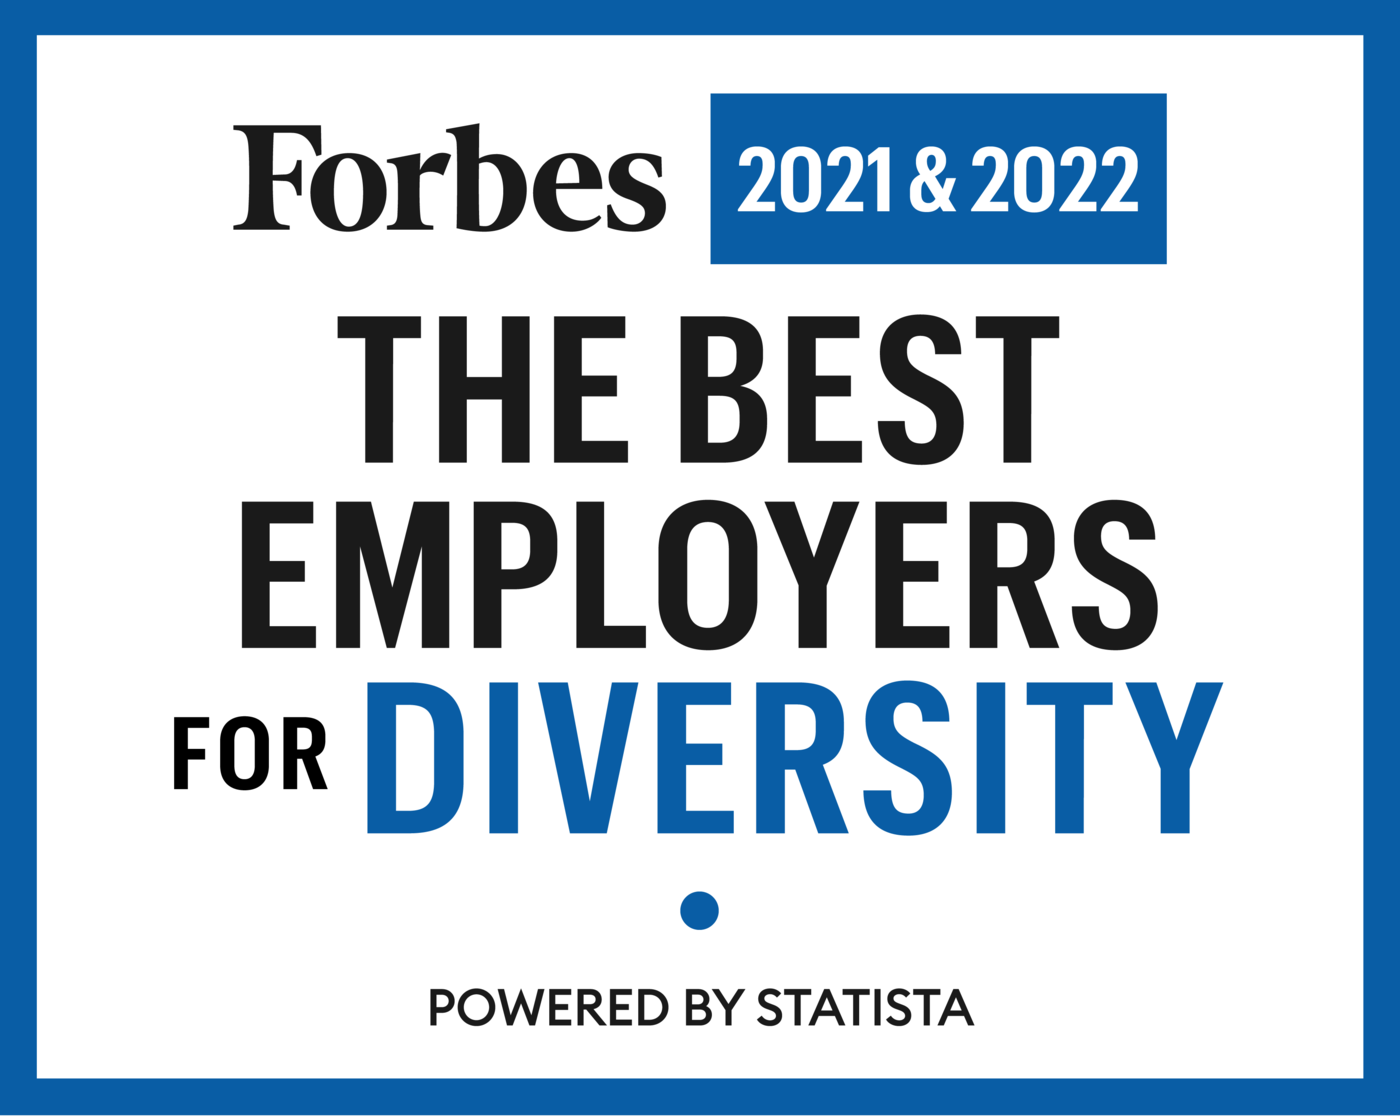 Forbes 2021 & 2022: The Best Employers for Diversity